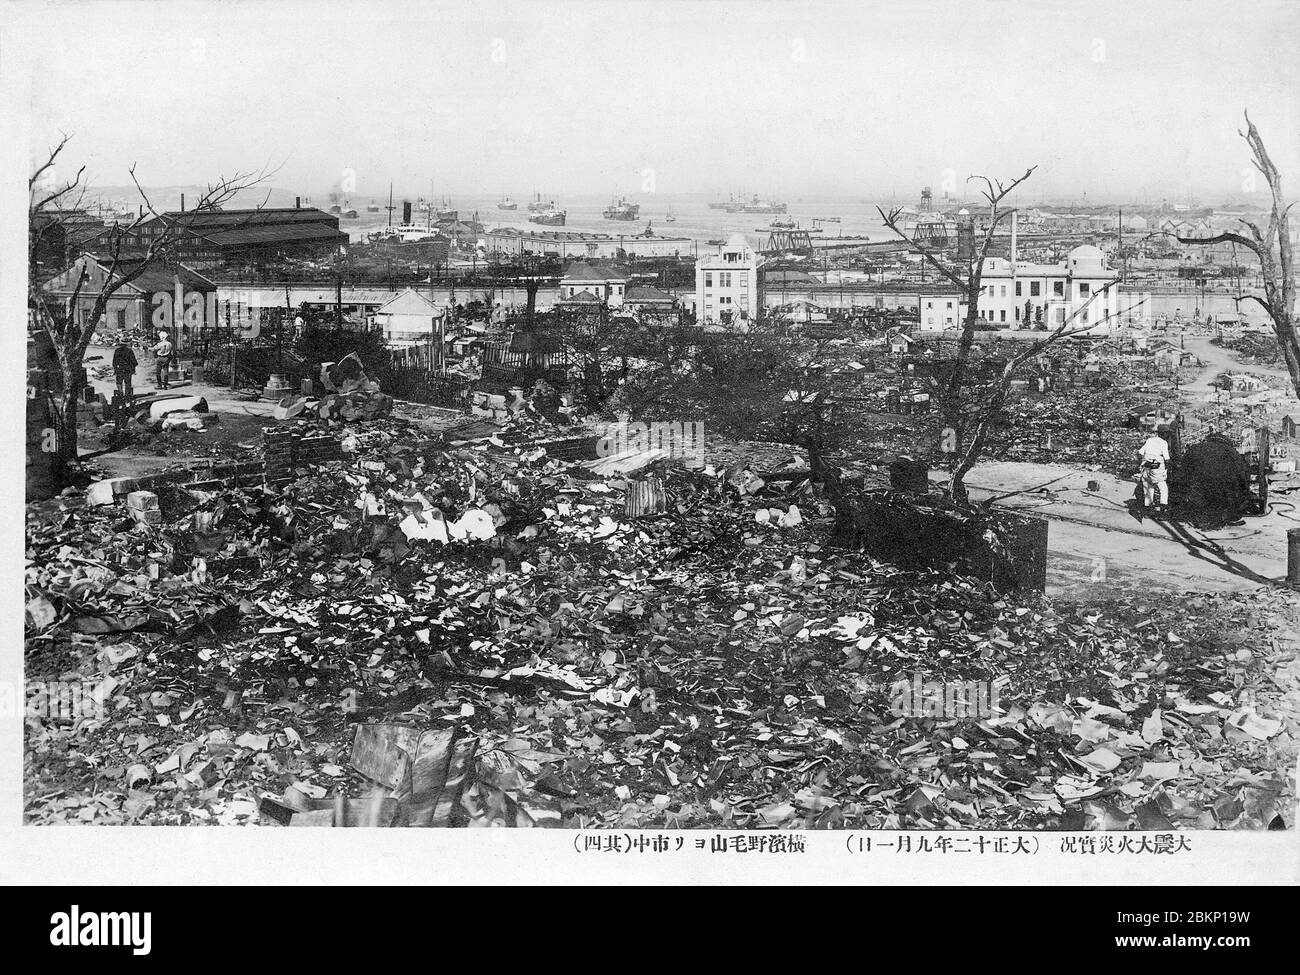 [ 1920s Japan - Yokohama Destroyed by the Great Kanto Earthquake ] —   The ruins of Yokohama after the Great Kanto Earthquake of September 1, 1923 (Taisho 12). The photographer took this sobering photo from  Noge-Yama.  The quake, with an estimated magnitude between 7.9 and 8.4 on the Richter scale, devastated Tokyo, the port city of Yokohama, surrounding prefectures of Chiba, Kanagawa, and Shizuoka, and claimed over 140,000 victims.  Photo number 4 of 4.  20th century vintage postcard. Stock Photo